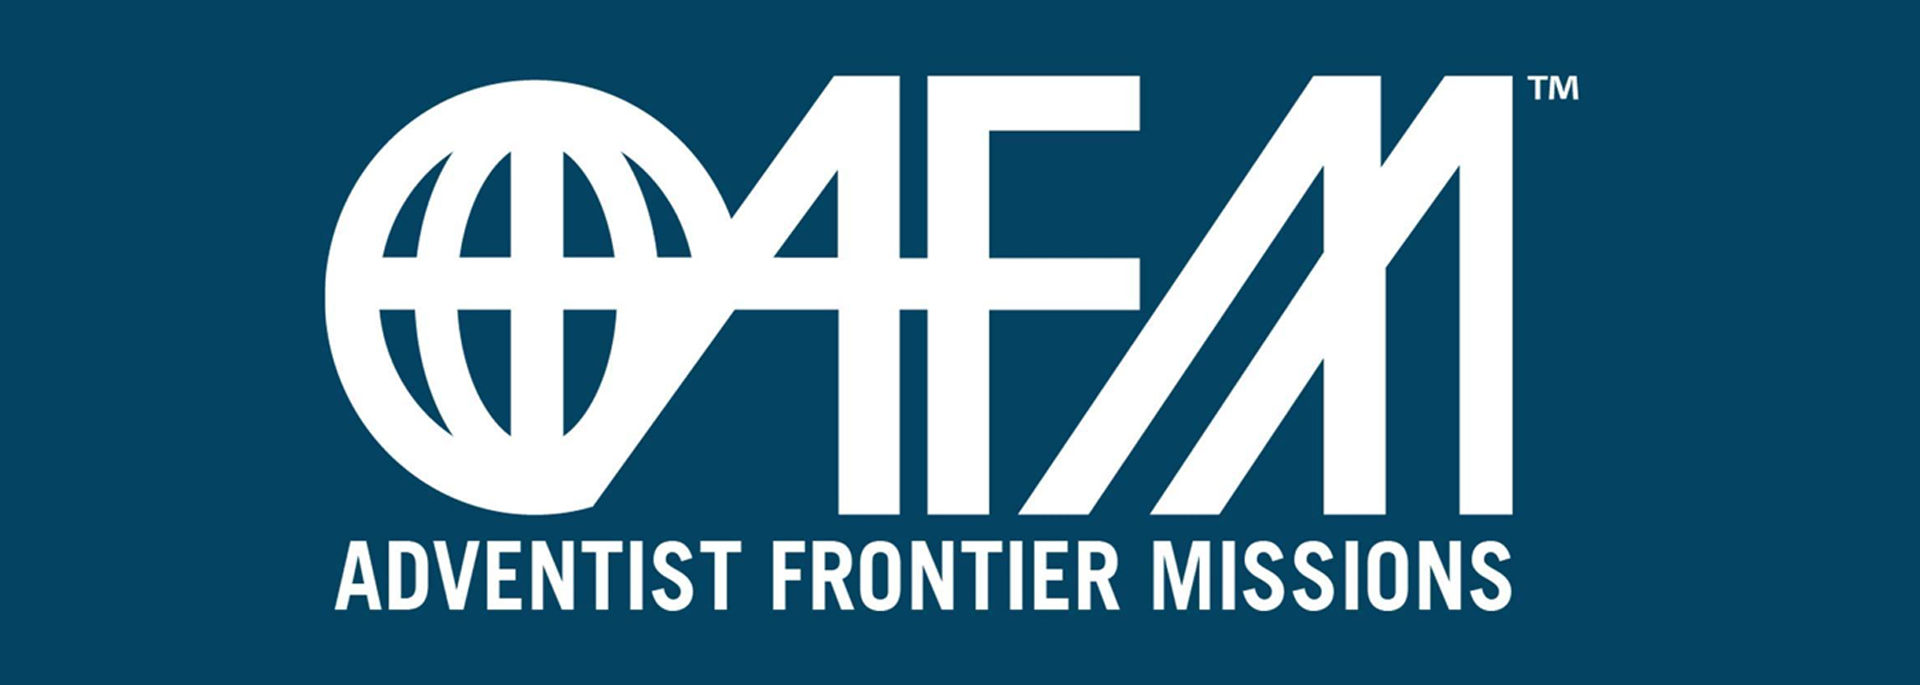 Adventist Frontier Missions